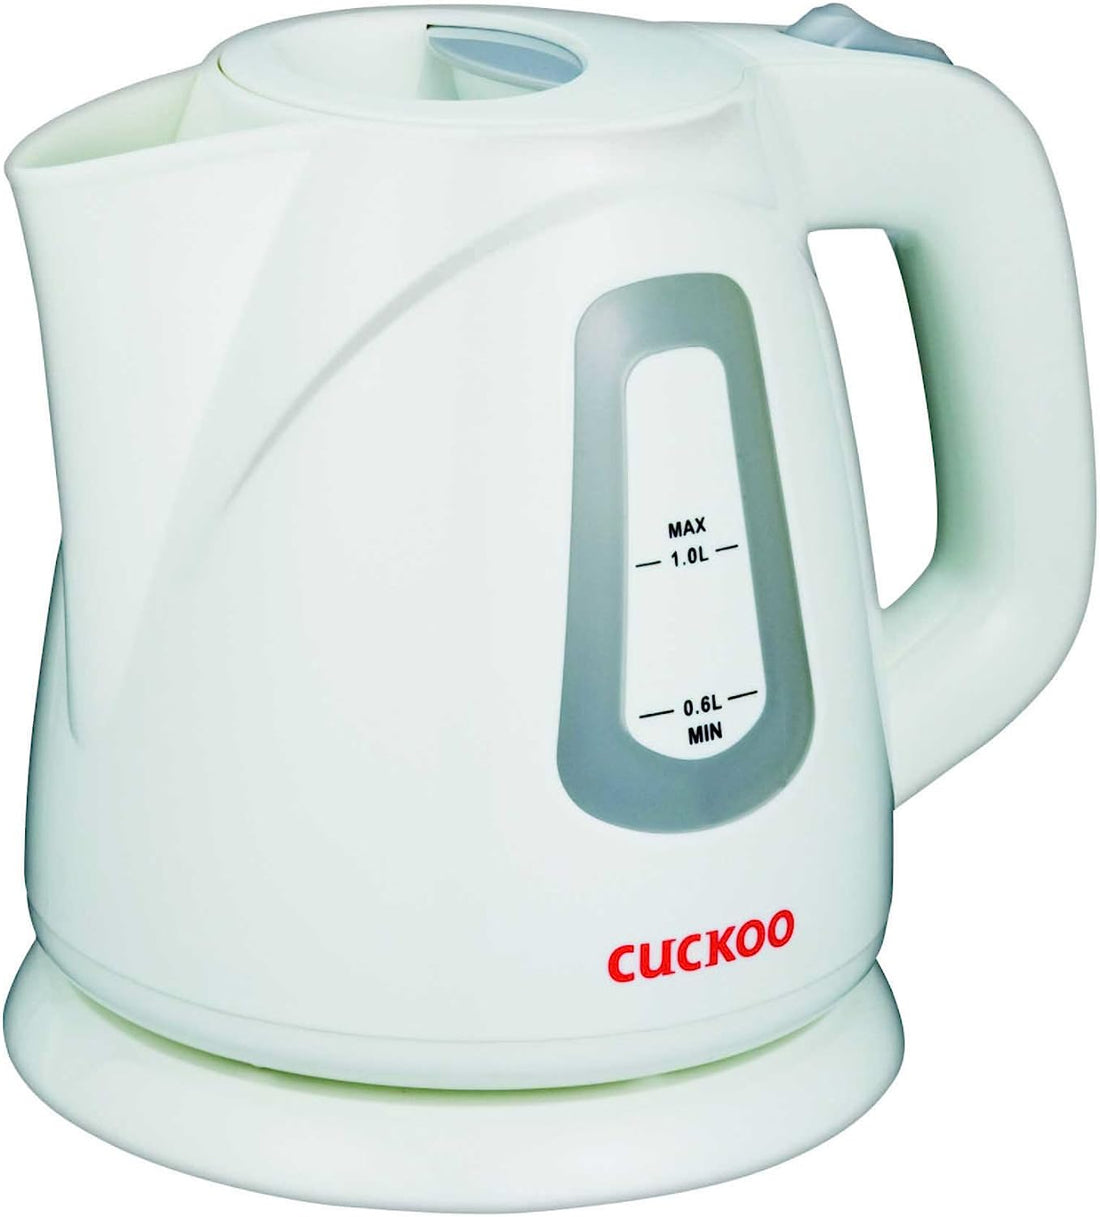 Cuckoo Automatic Electric Kettle, 1 Liter